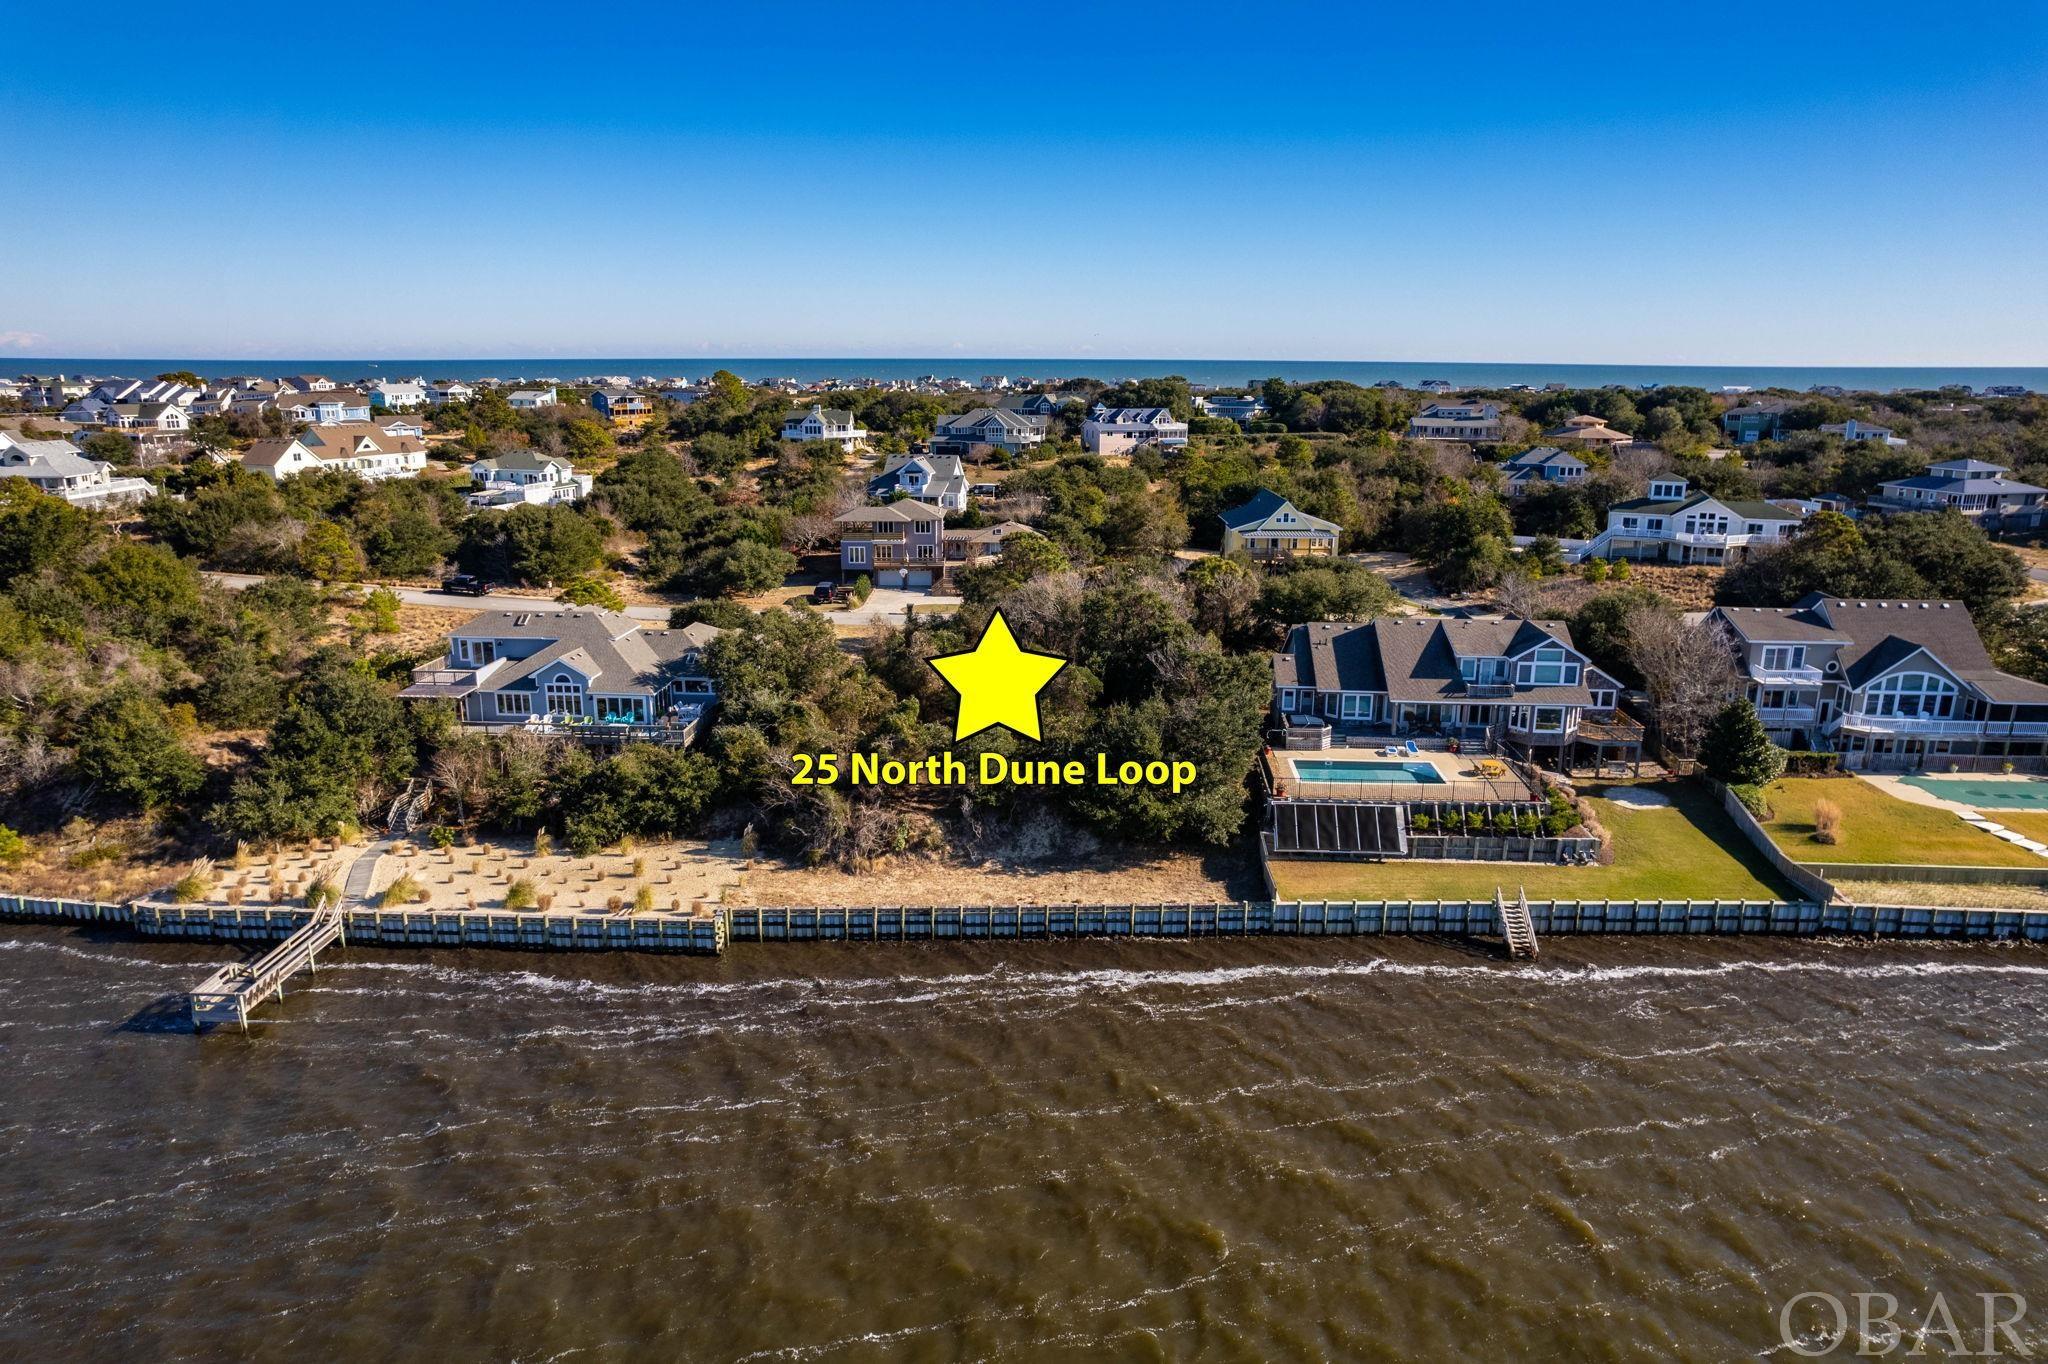 Enjoy beautiful sunsets, sound views, winter swans, osprey, etc., from this perfect location for your dream home in a quiet neighborhood with mostly year-round residents living on the street.  Take advantage of a rare opportunity to own a soundfront lot in this upscale area of Southern Shores in an X Flood Zone.    Bulkhead was replaced in 2021.  Join the Southern Shores Civic Association(SSCA) for $65 annual fee to have parking access at Hillcrest Beach, $25 to join Tennis Club, $25 for the Boat Club, and you will have many social opportunities to meet new friends, volunteer, and partake of picnics at the marina. It is a short distance to the beach, Sea Oats Park, Marinas for boat access, Soundview Park and the Duck Boardwalk, restaurants and shops.